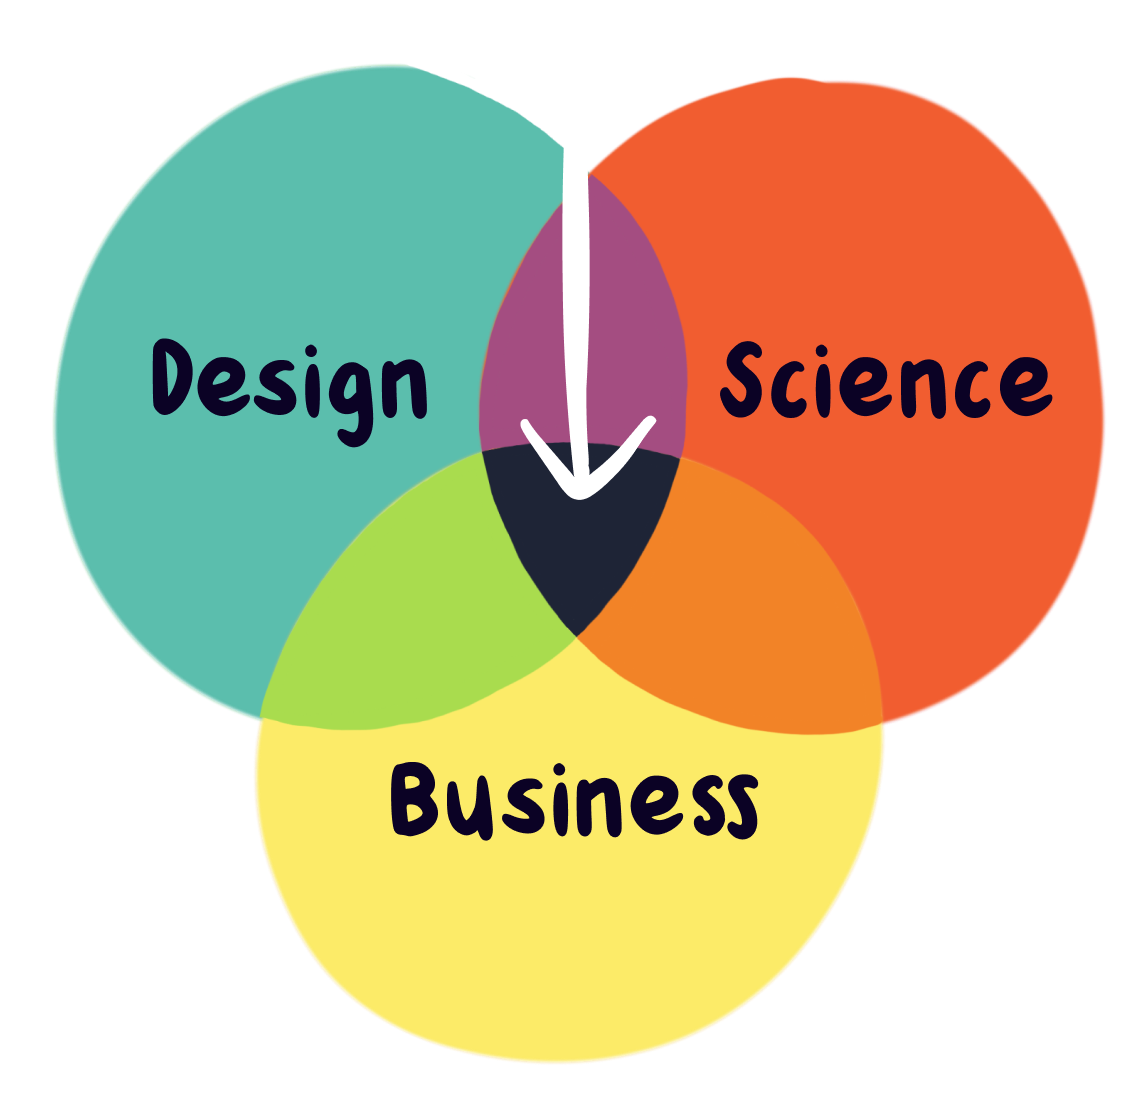 A venn diagram showing that Conversion Design is where design, science, and business intersect.